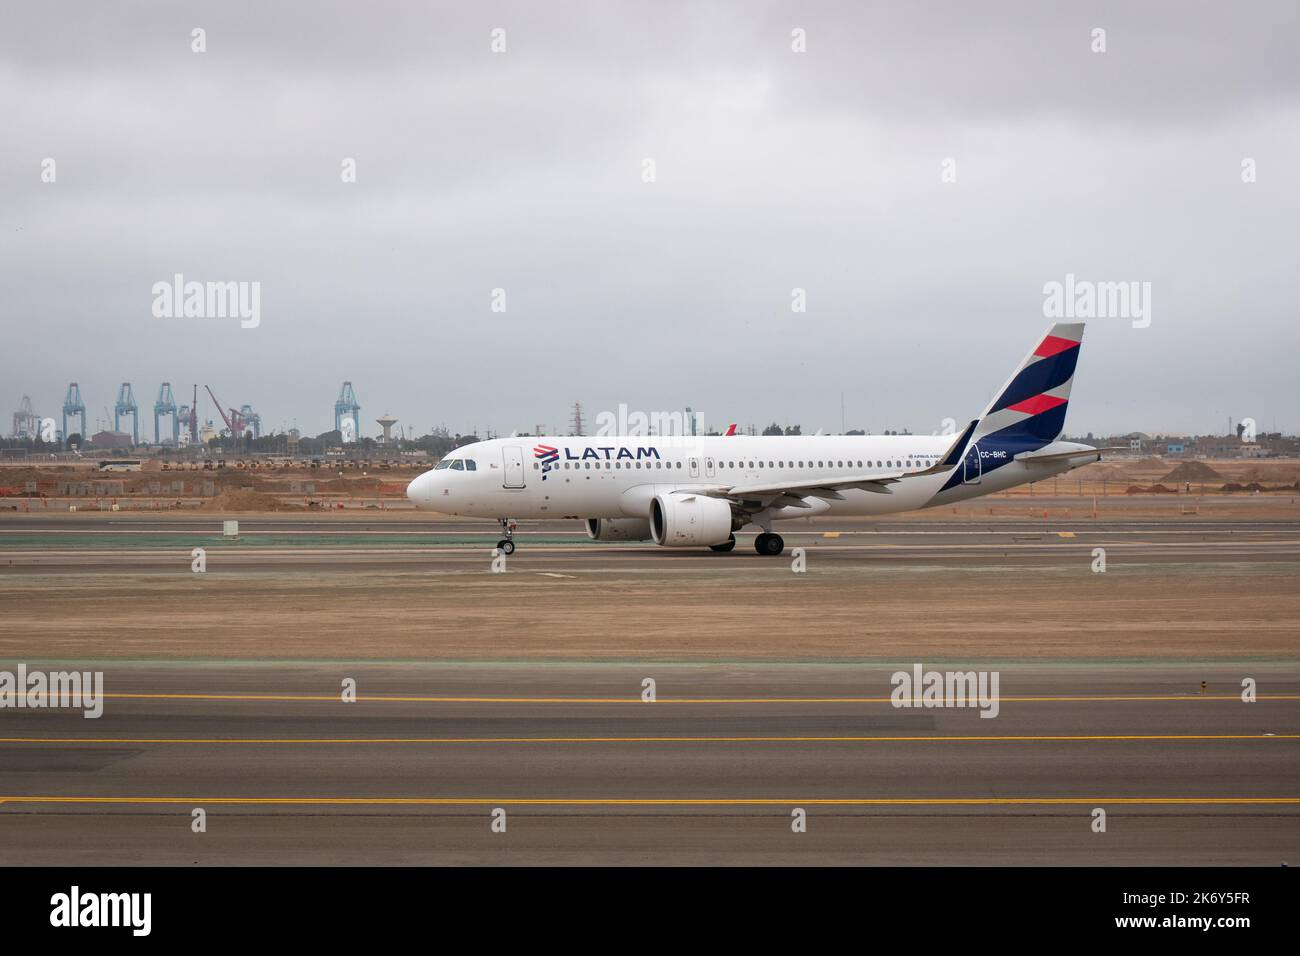 Lima, Peru - July 27 2022: Plane Taking off from the Airport on a Cloudy Day Stock Photo